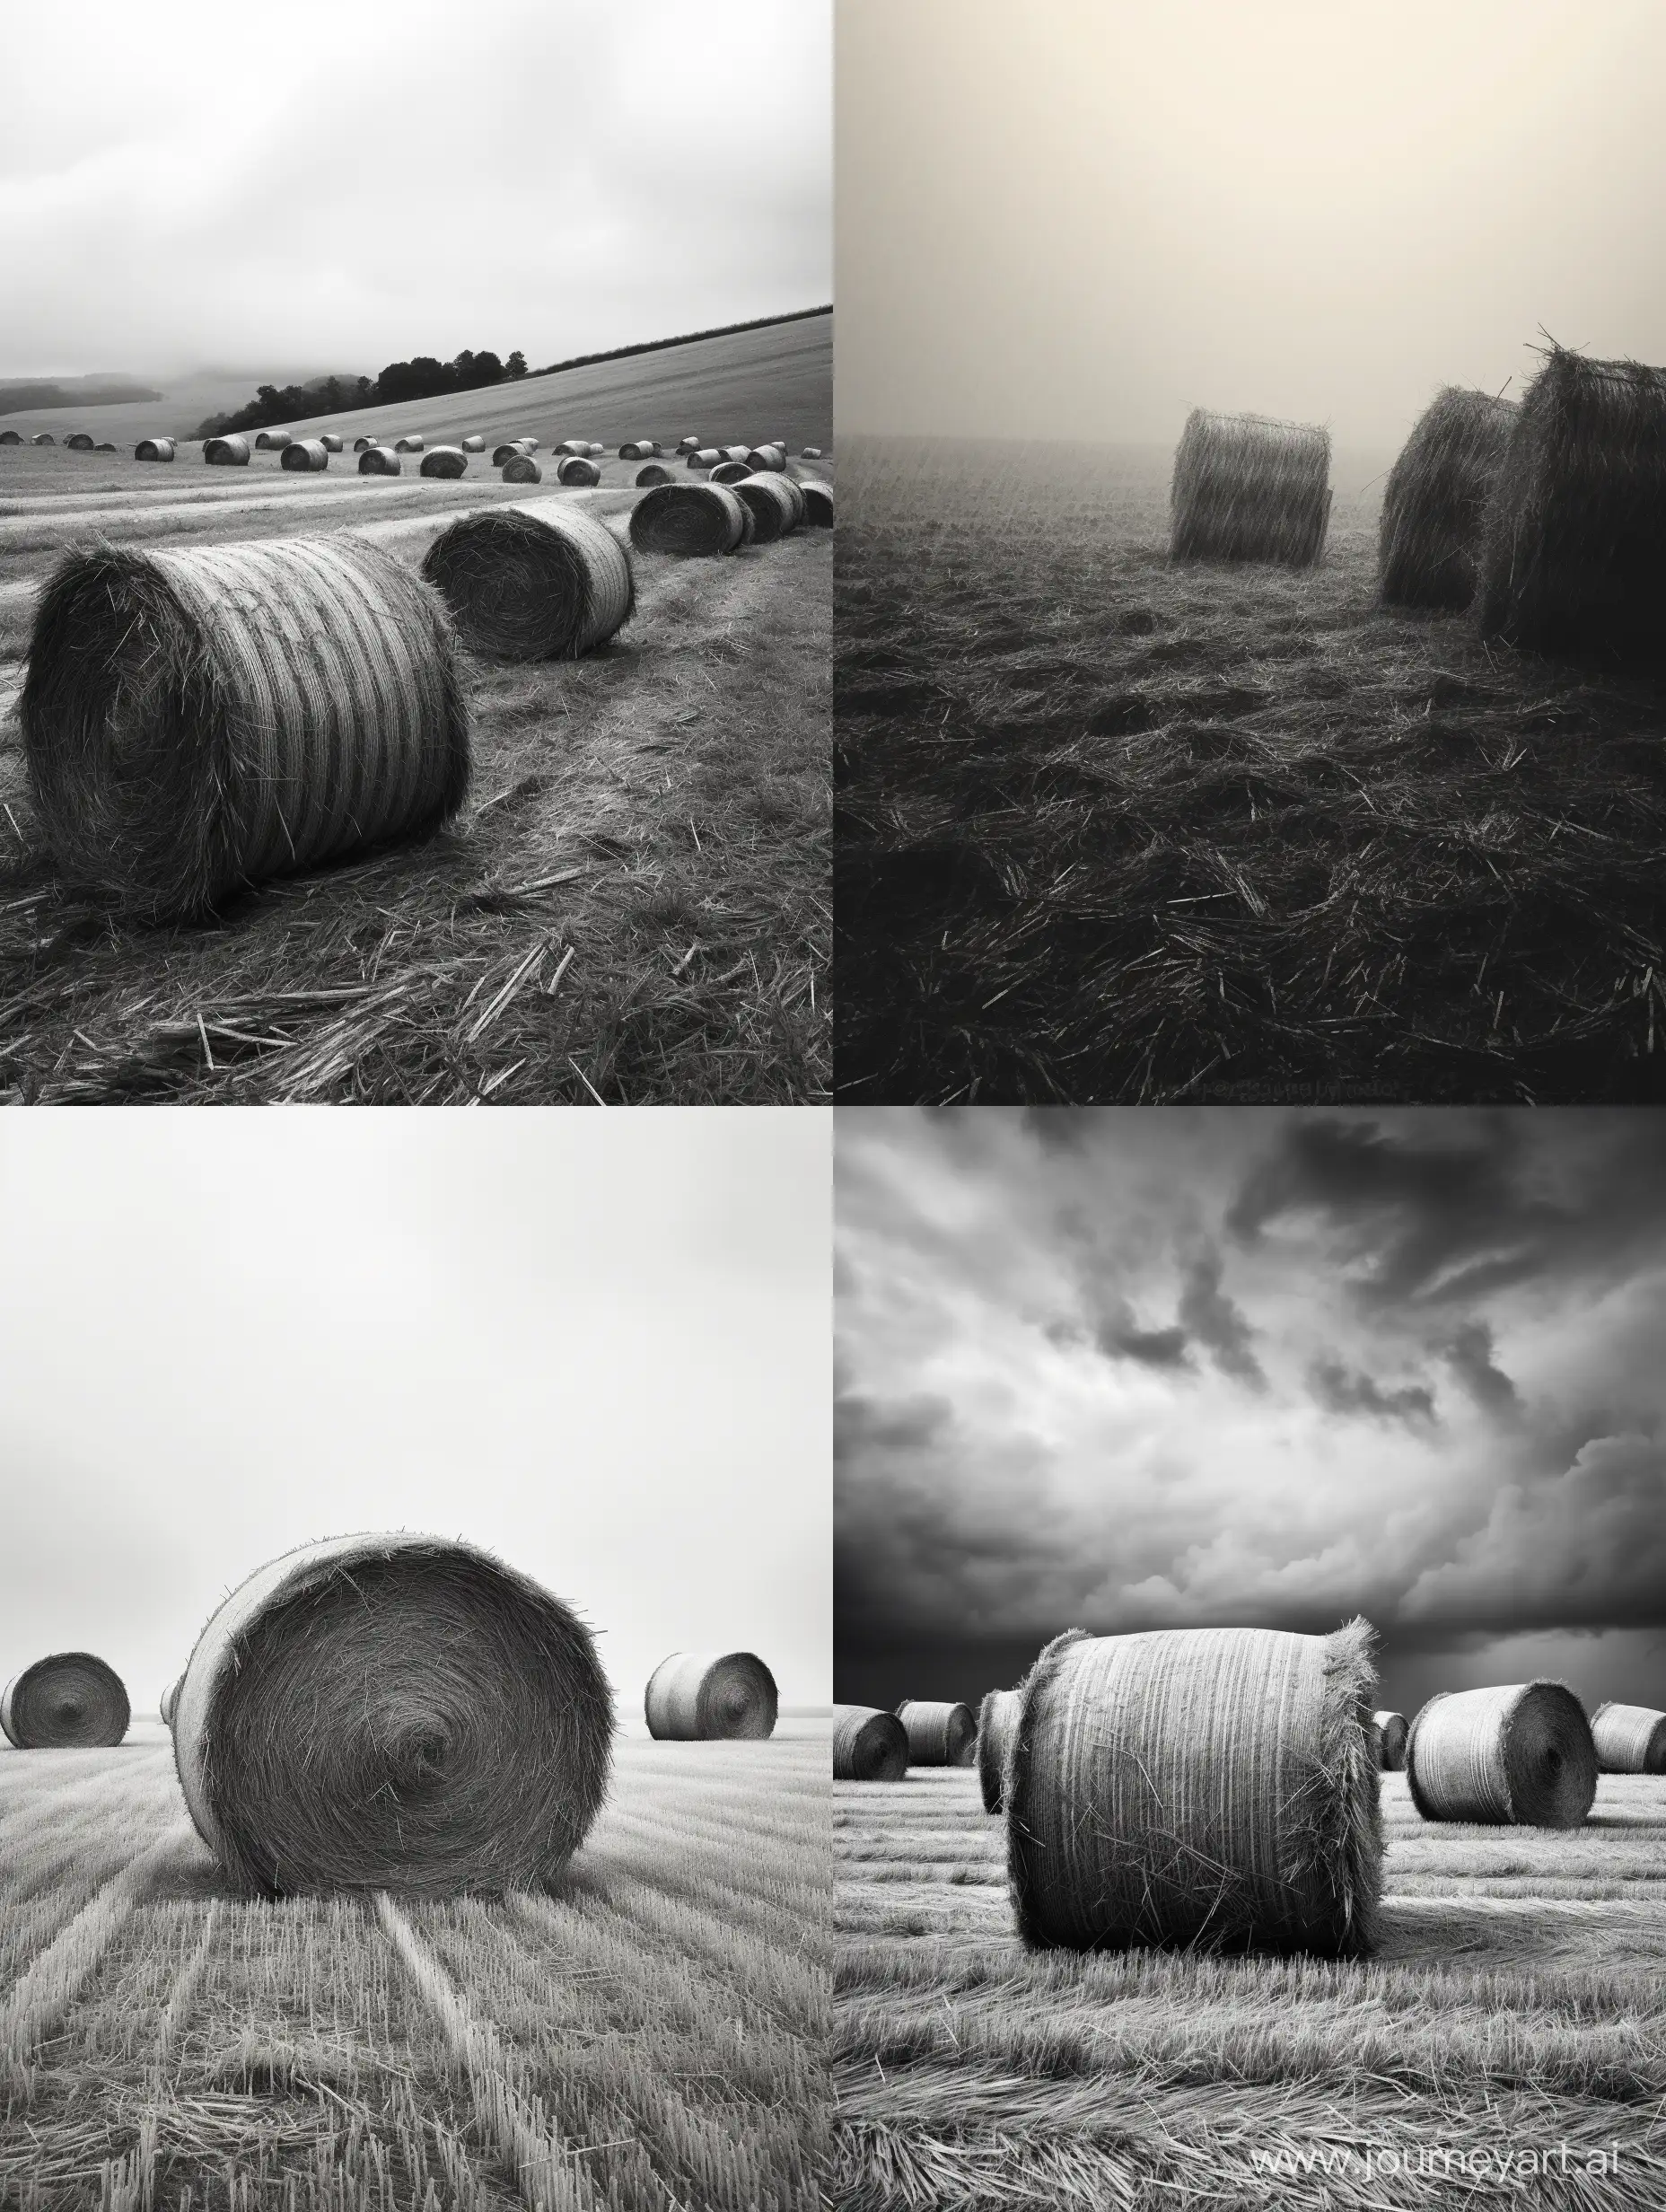 Straw bales in the countryside with rain (black and white)